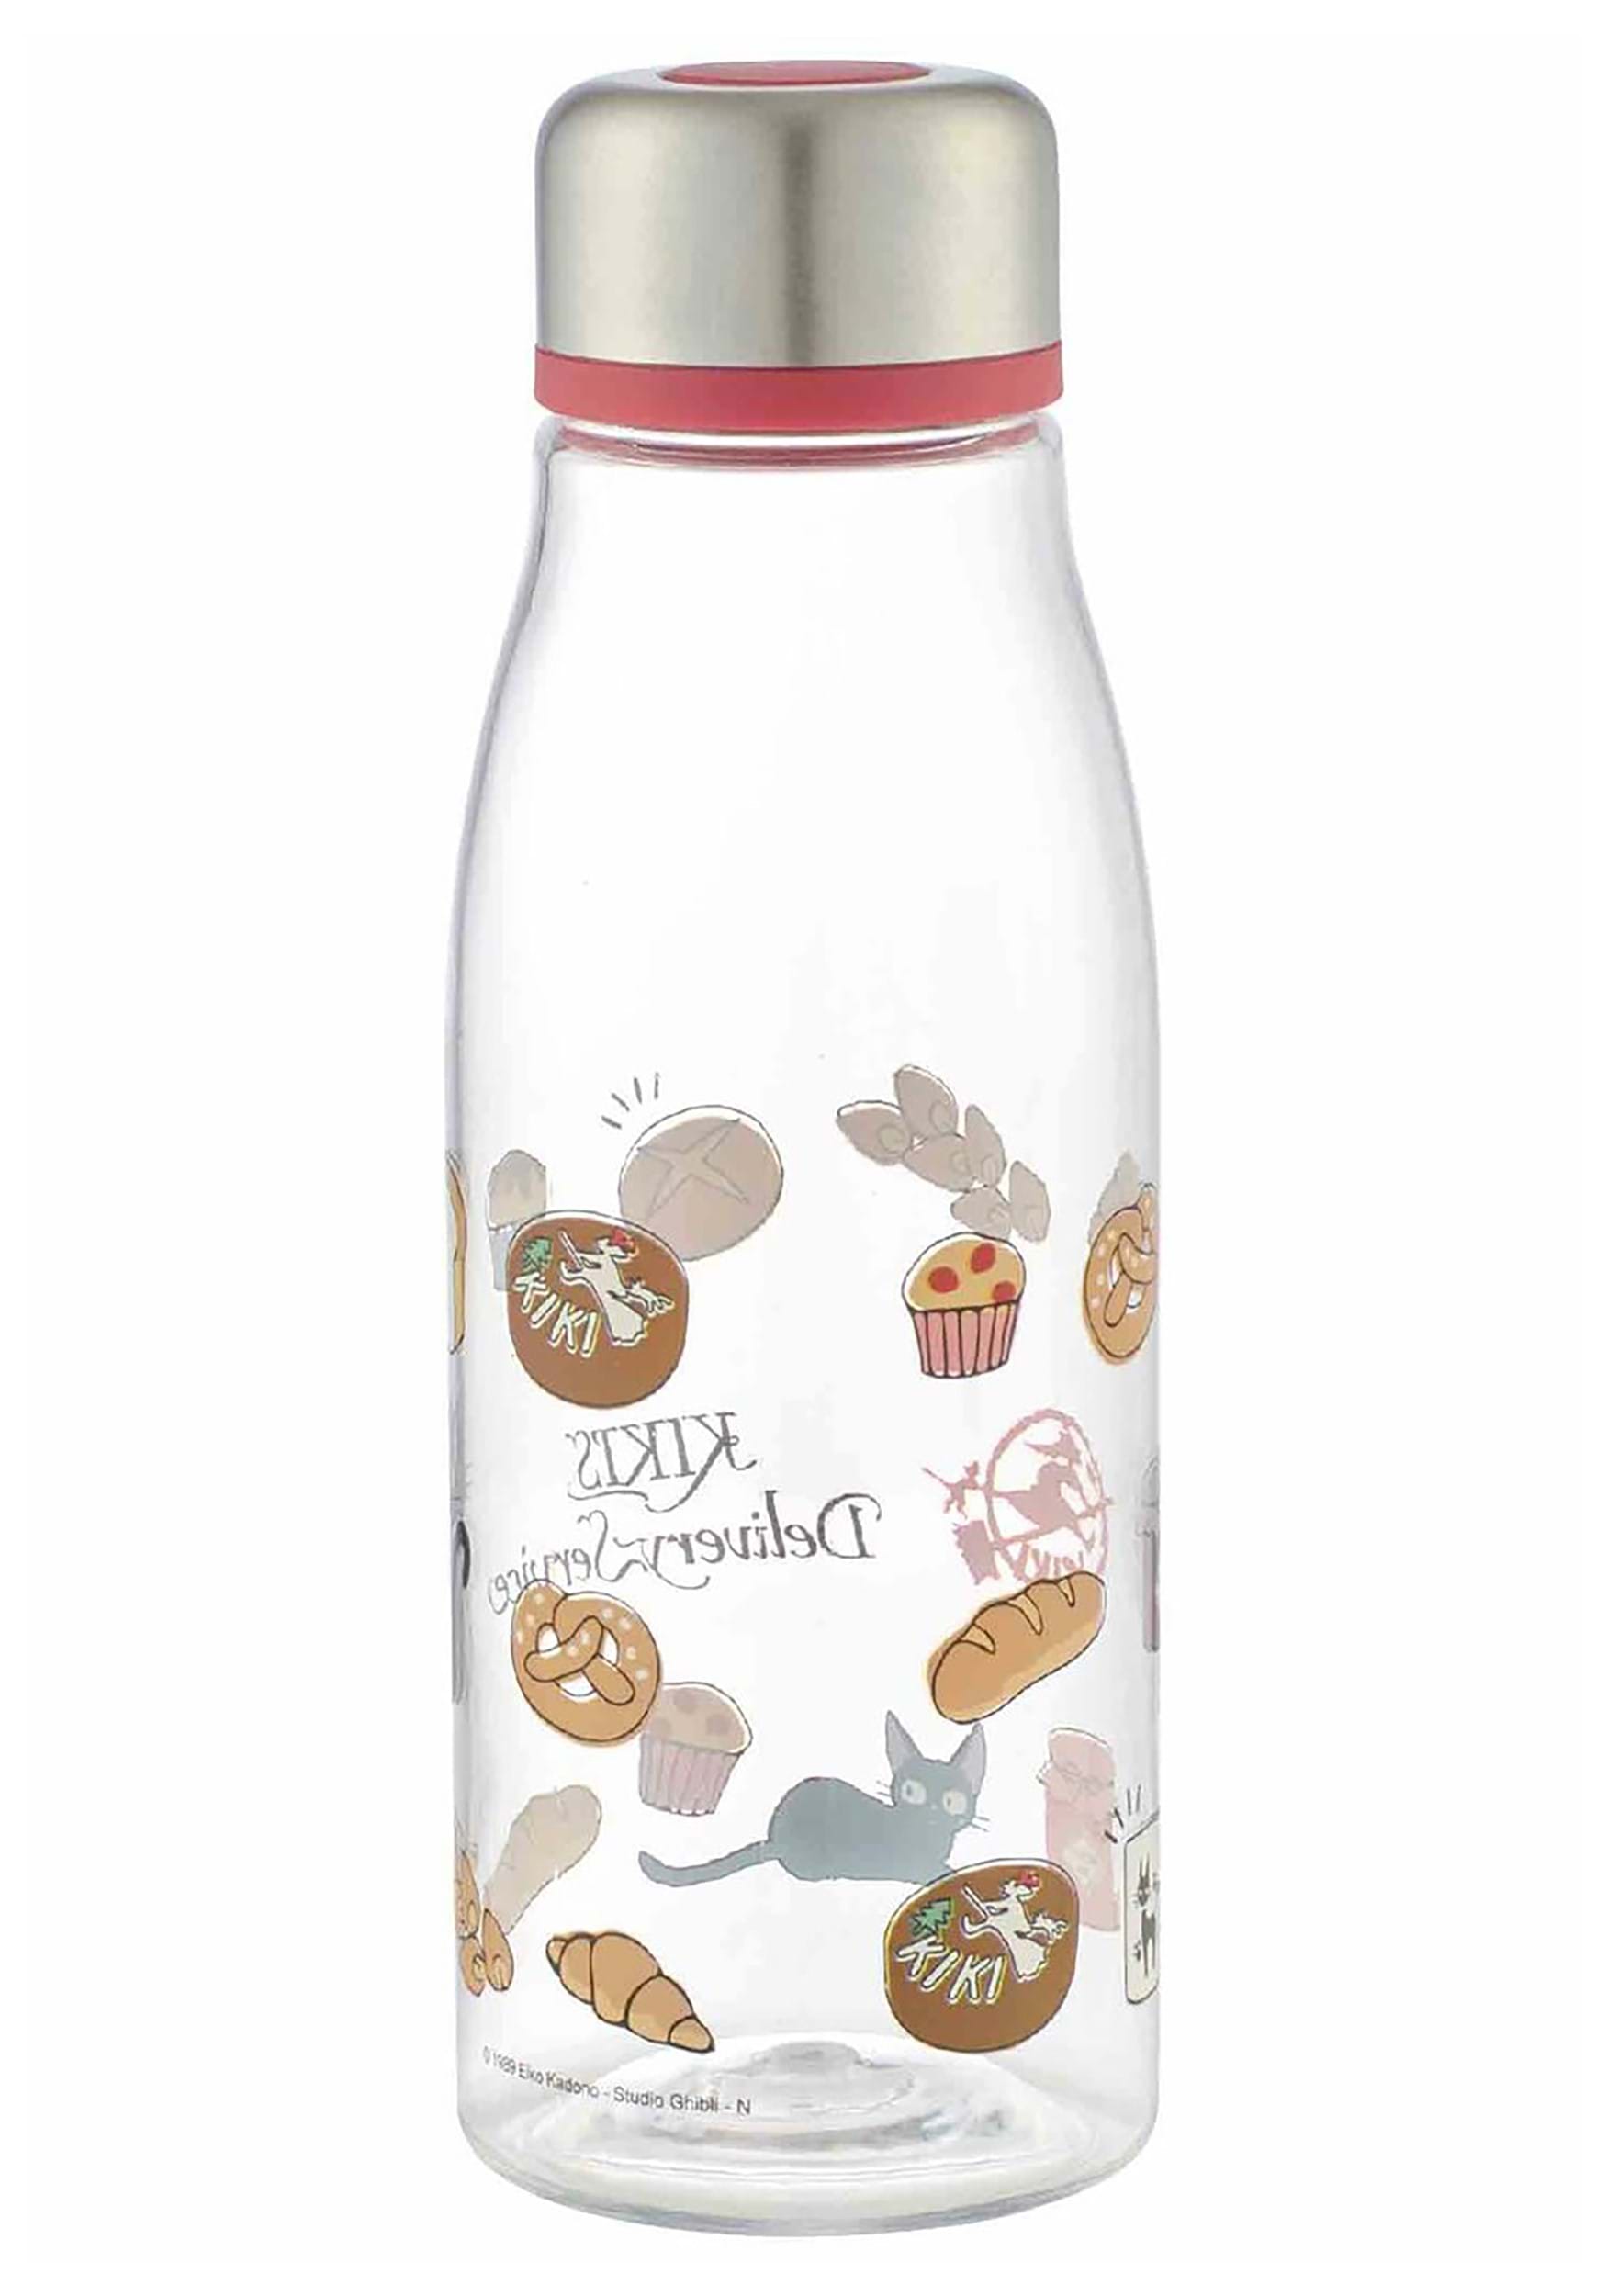 Kiki’s Delivery Service Bakery Goodies Water Bottle